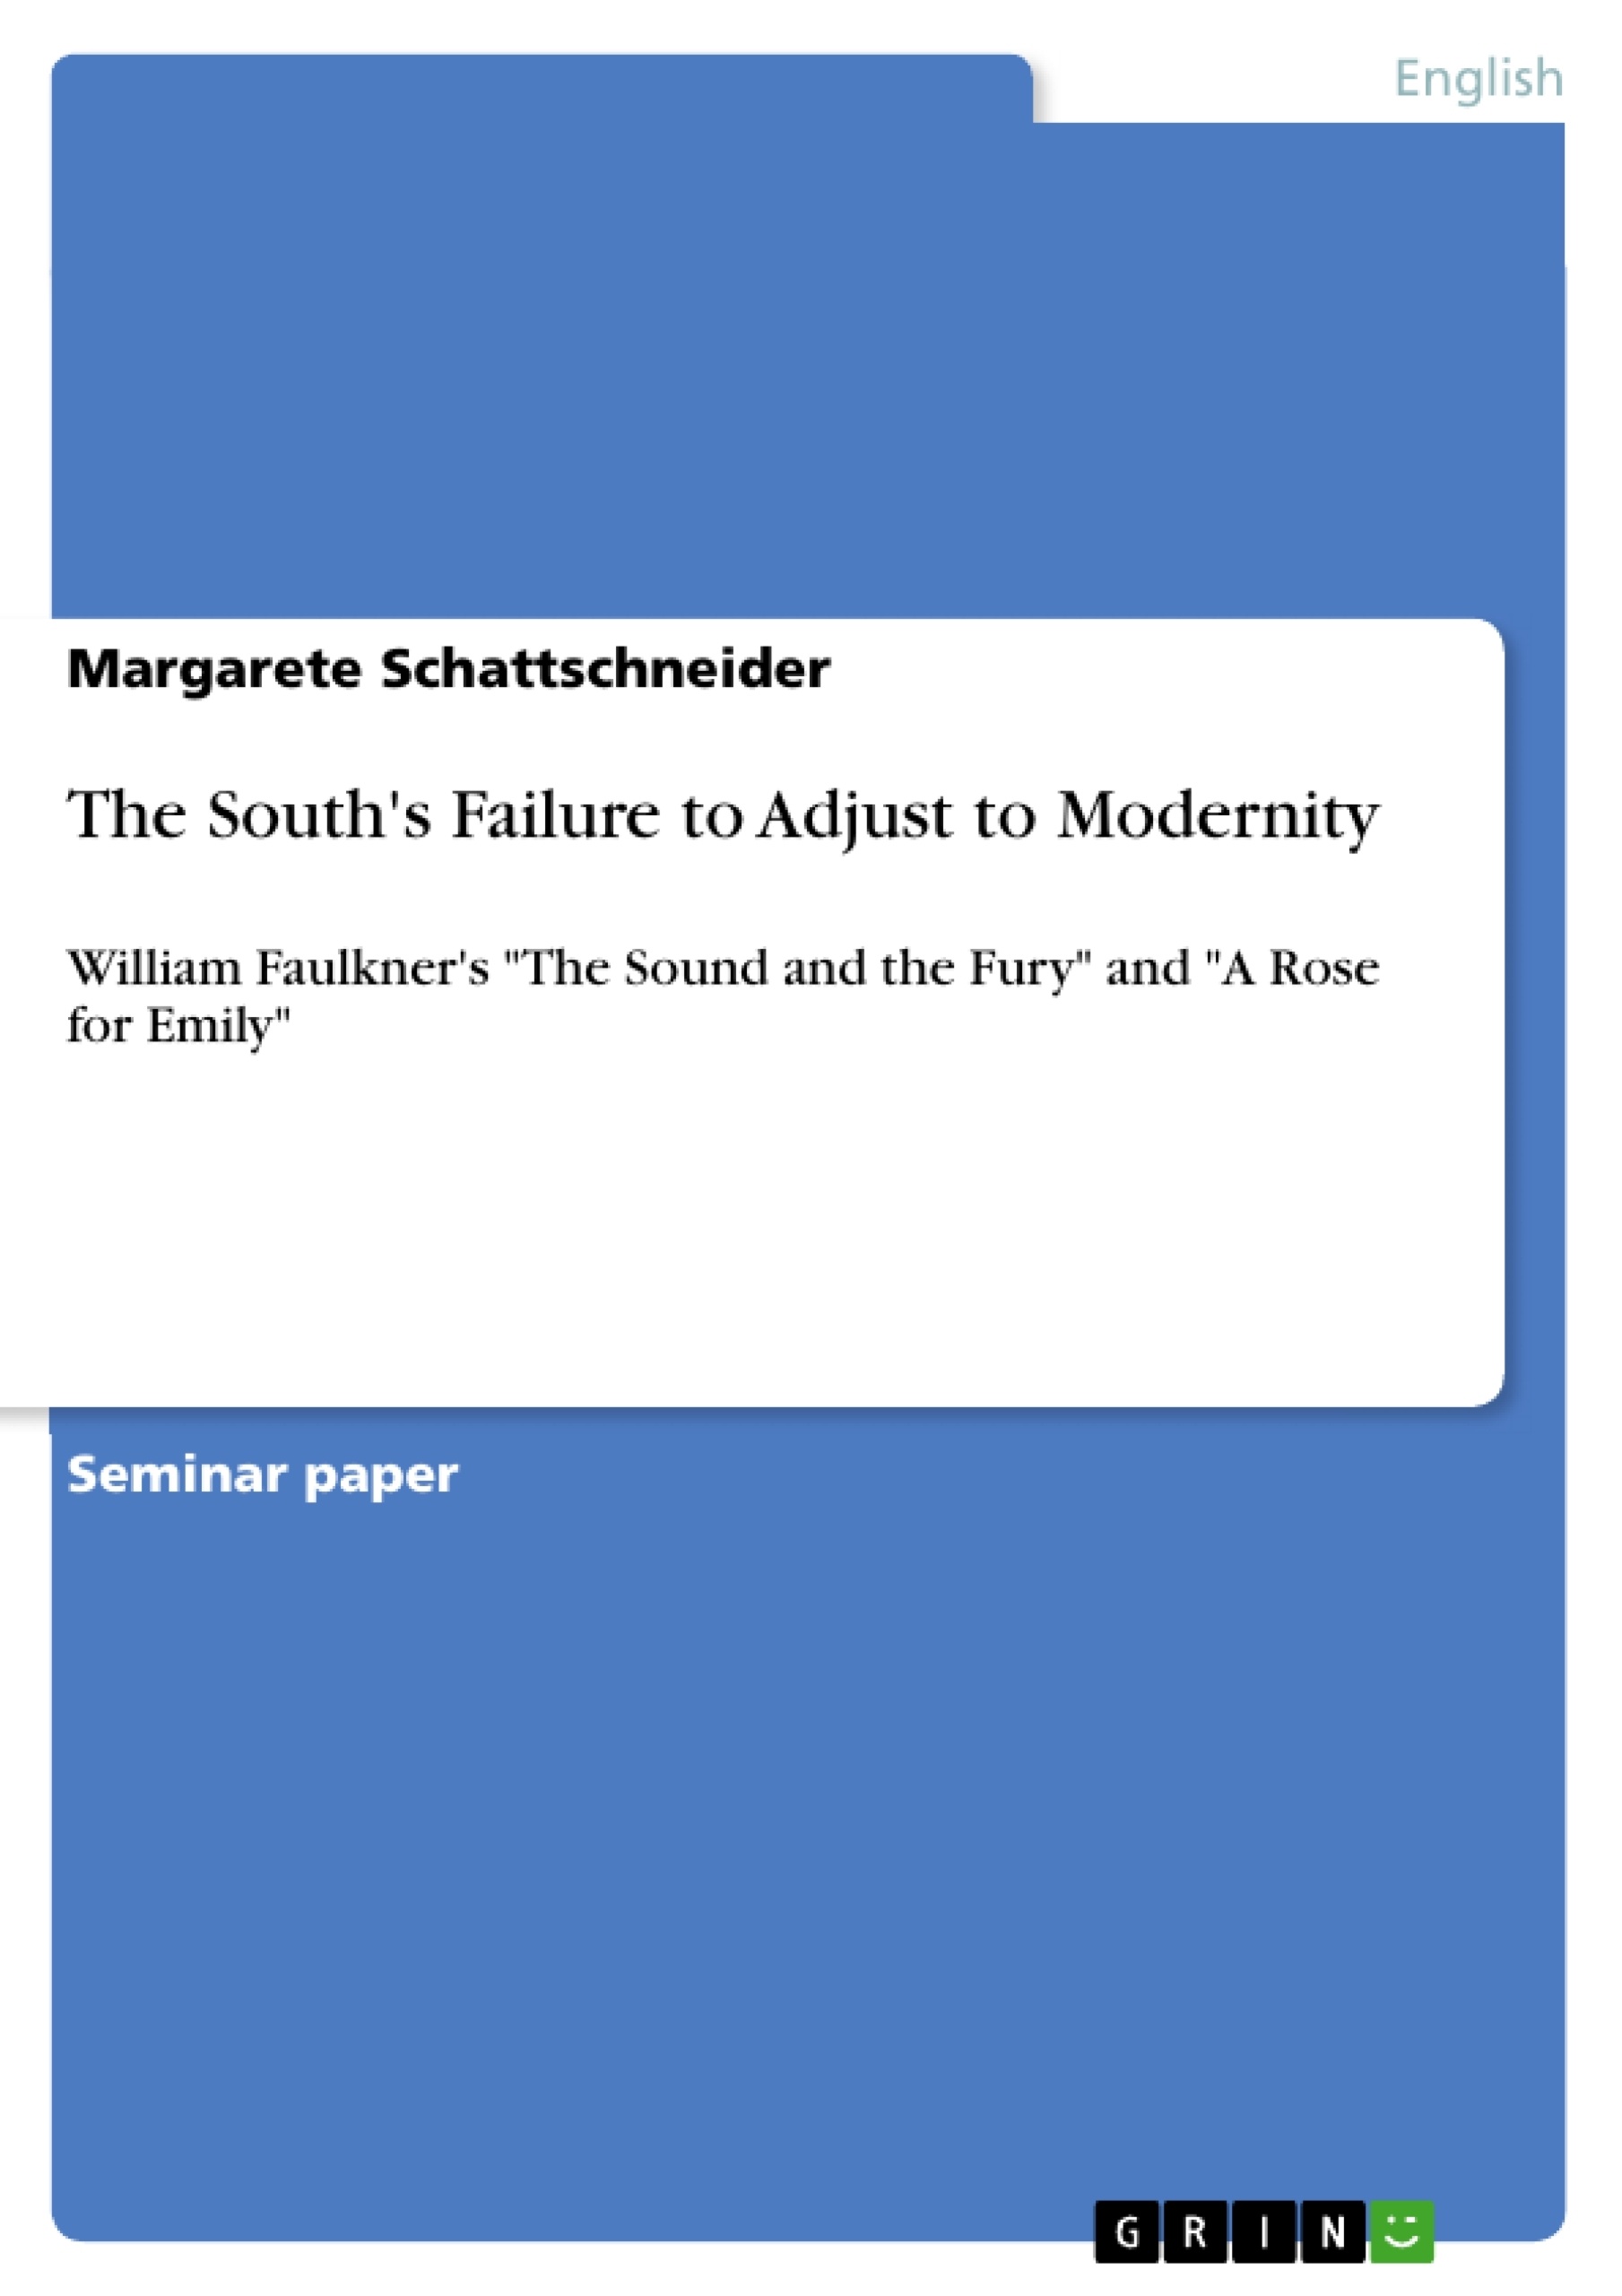 Título: The South's Failure to Adjust to Modernity